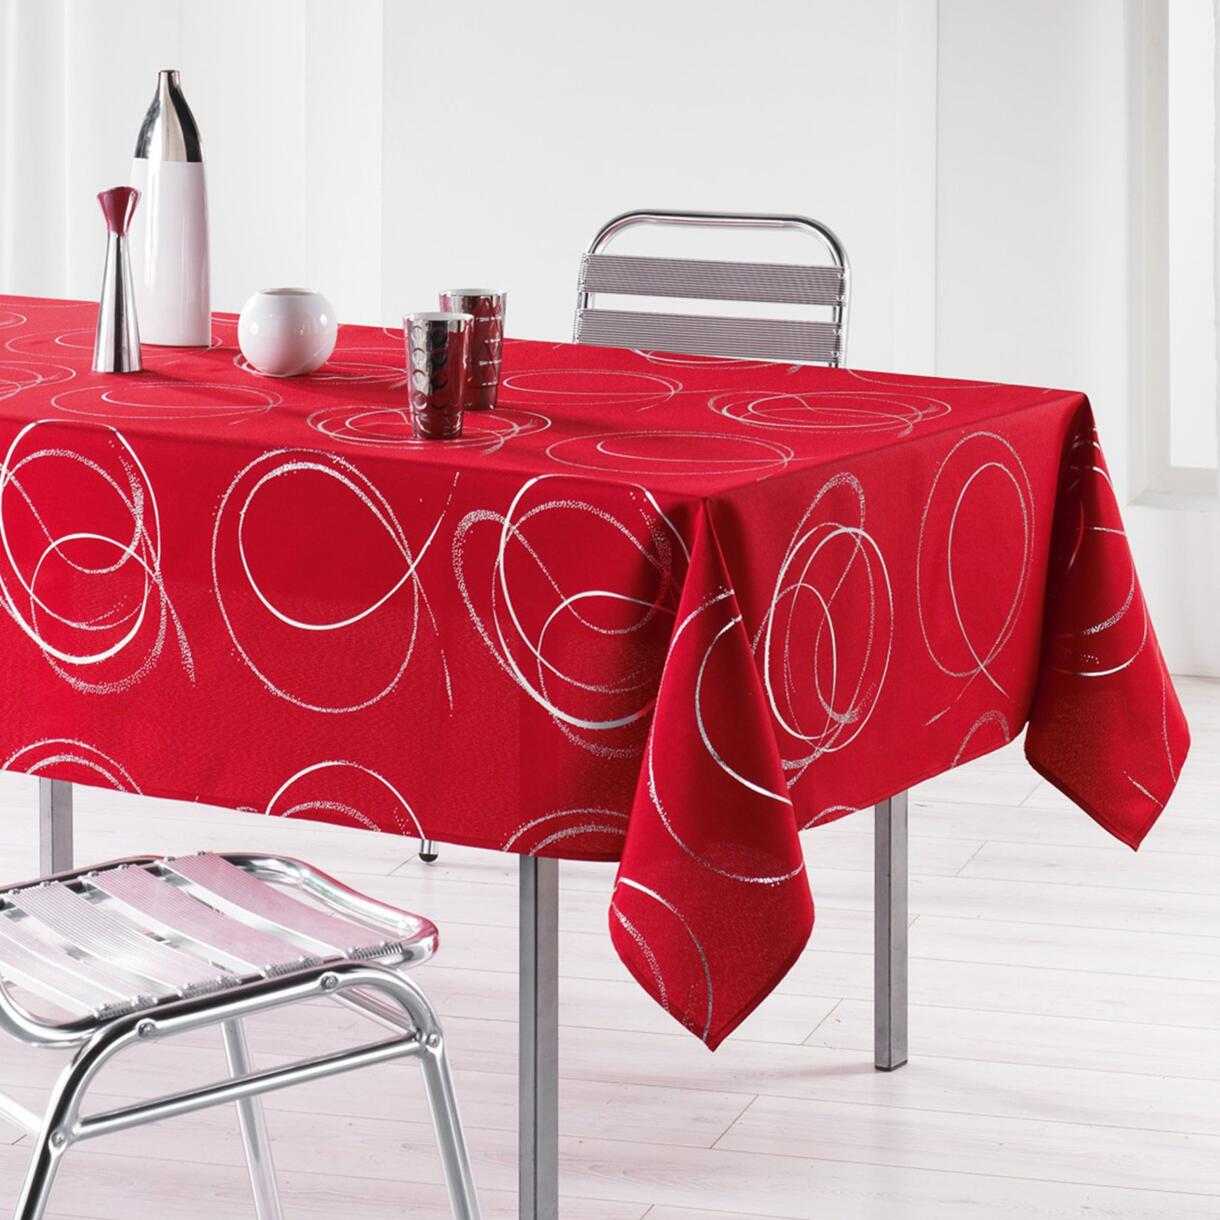 Nappe rectangulaire (L300 cm) Bully Rouge 1